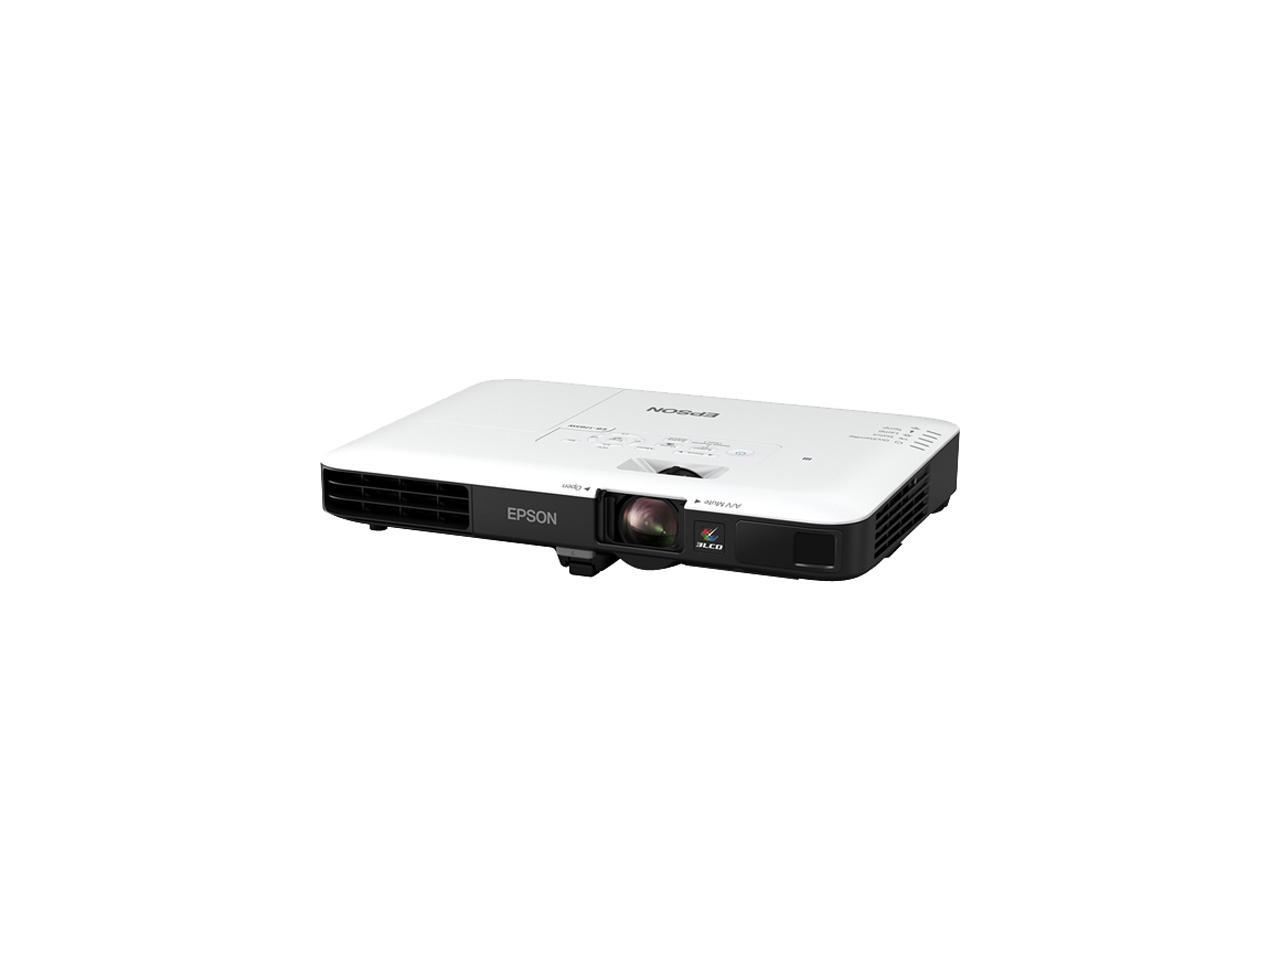 Epson PowerLite 1785W Wireless WXGA 3LCD Portable Projector with Miracast Streaming 3200 lumens, V11H793020